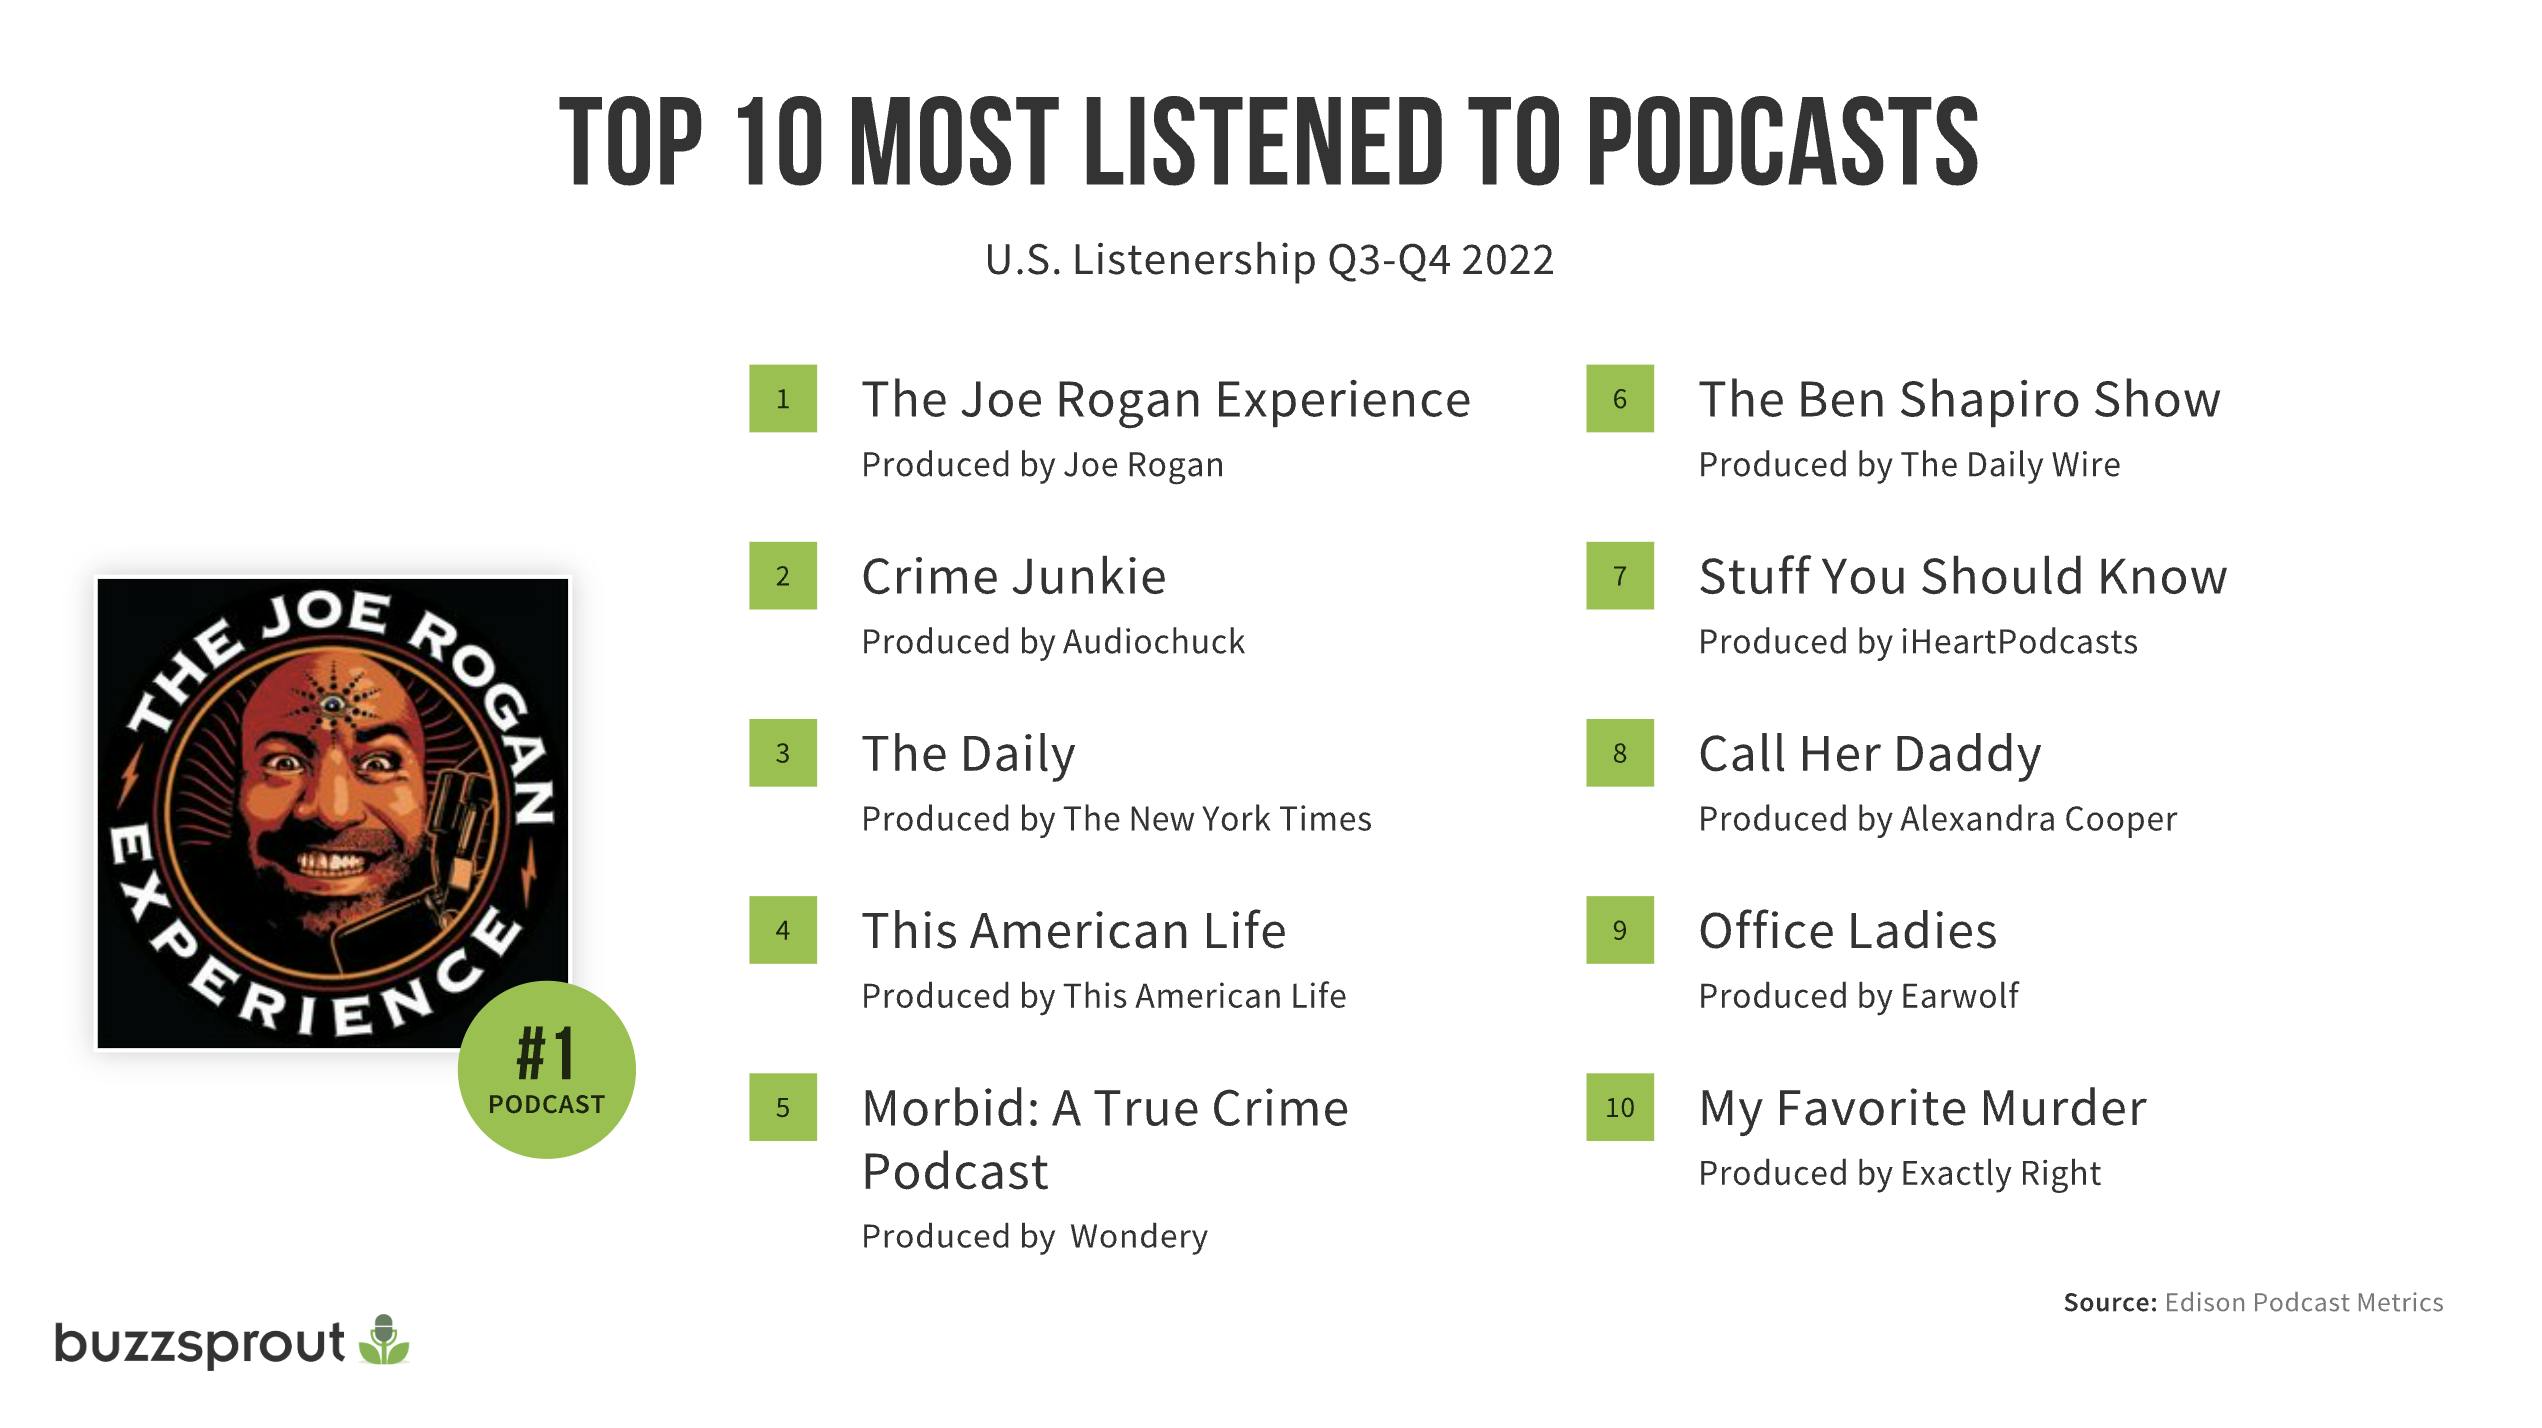 Most Popular Podcasts